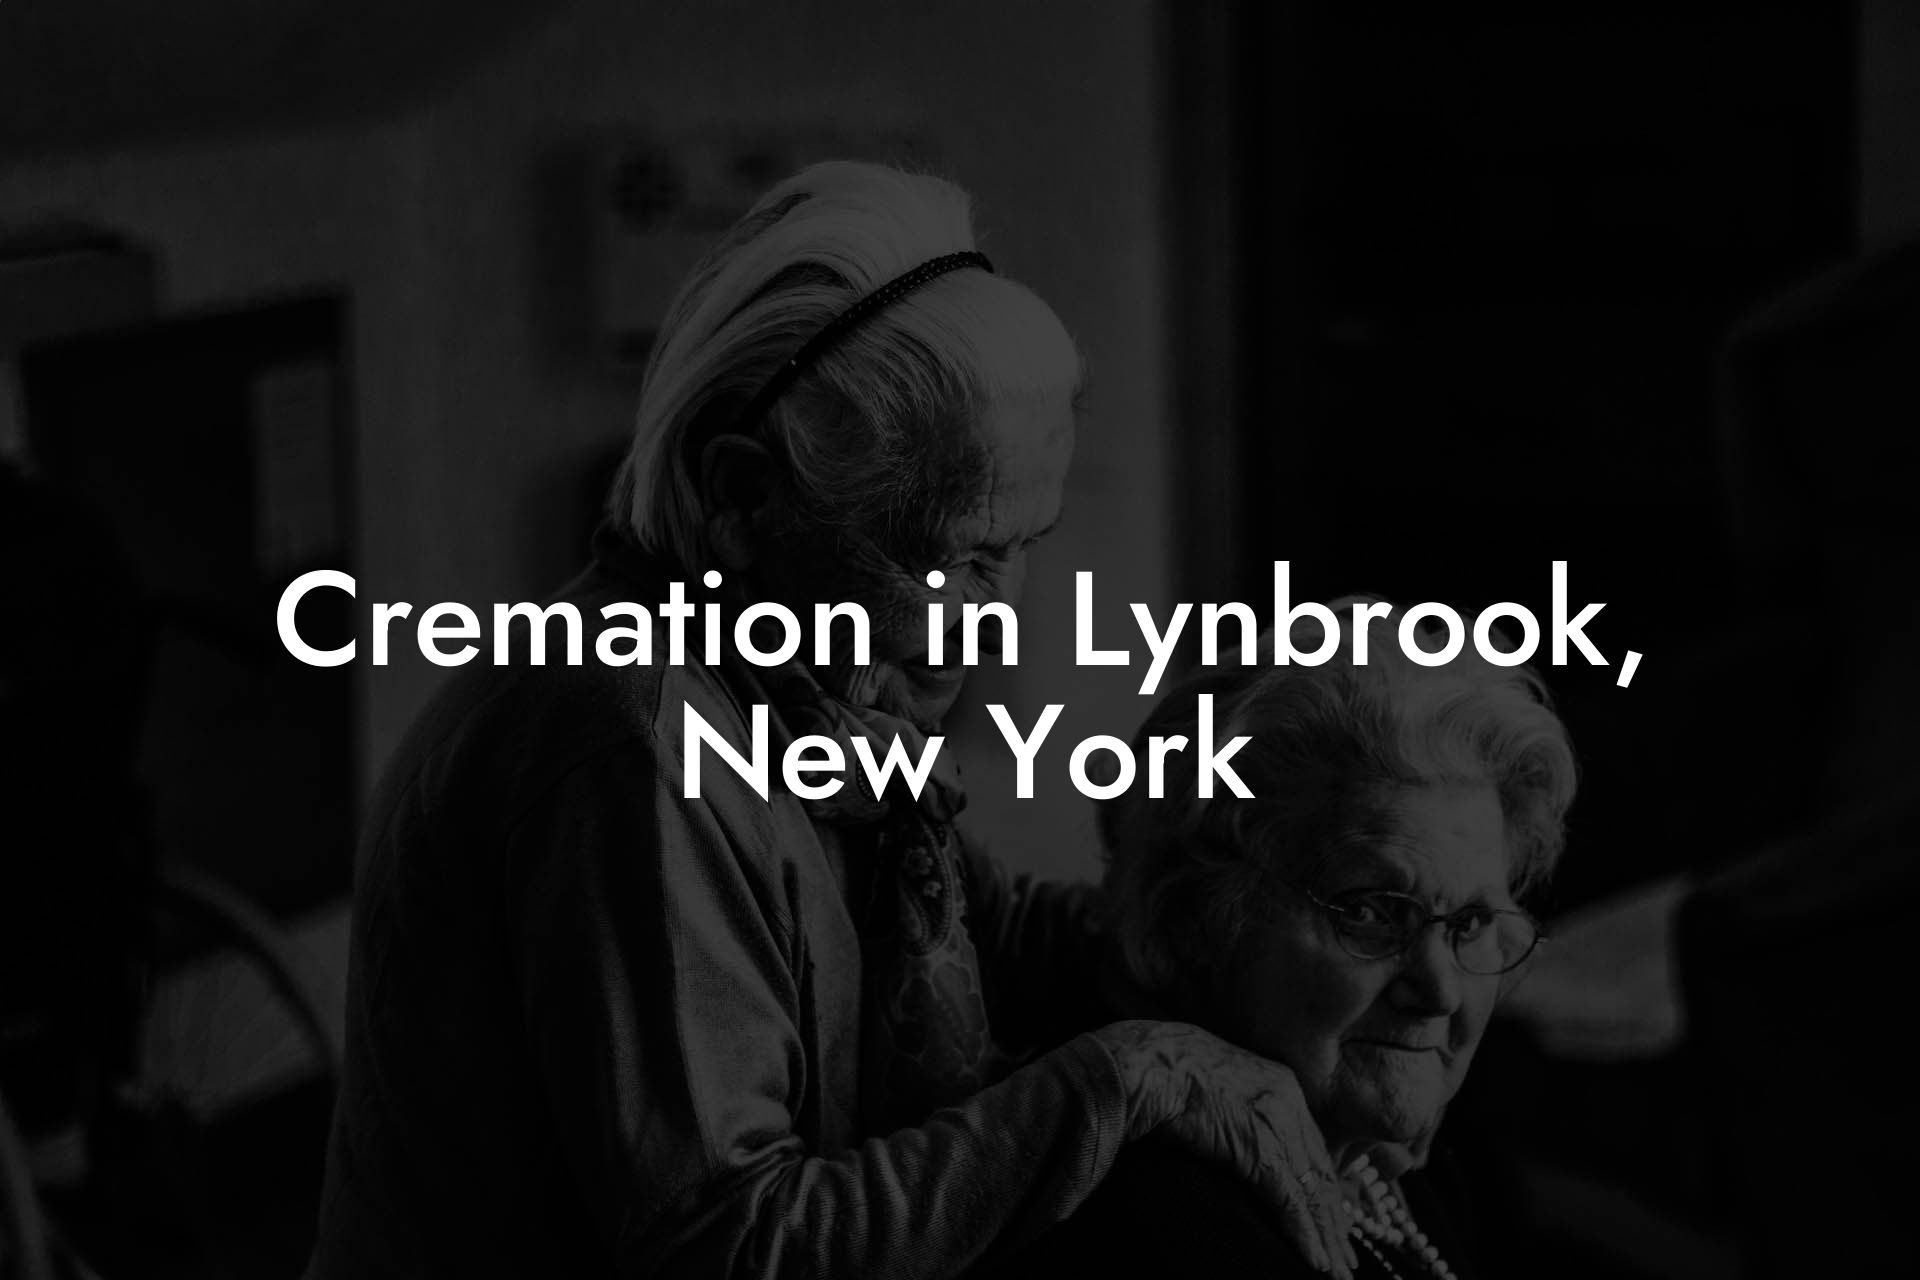 Cremation in Lynbrook, New York